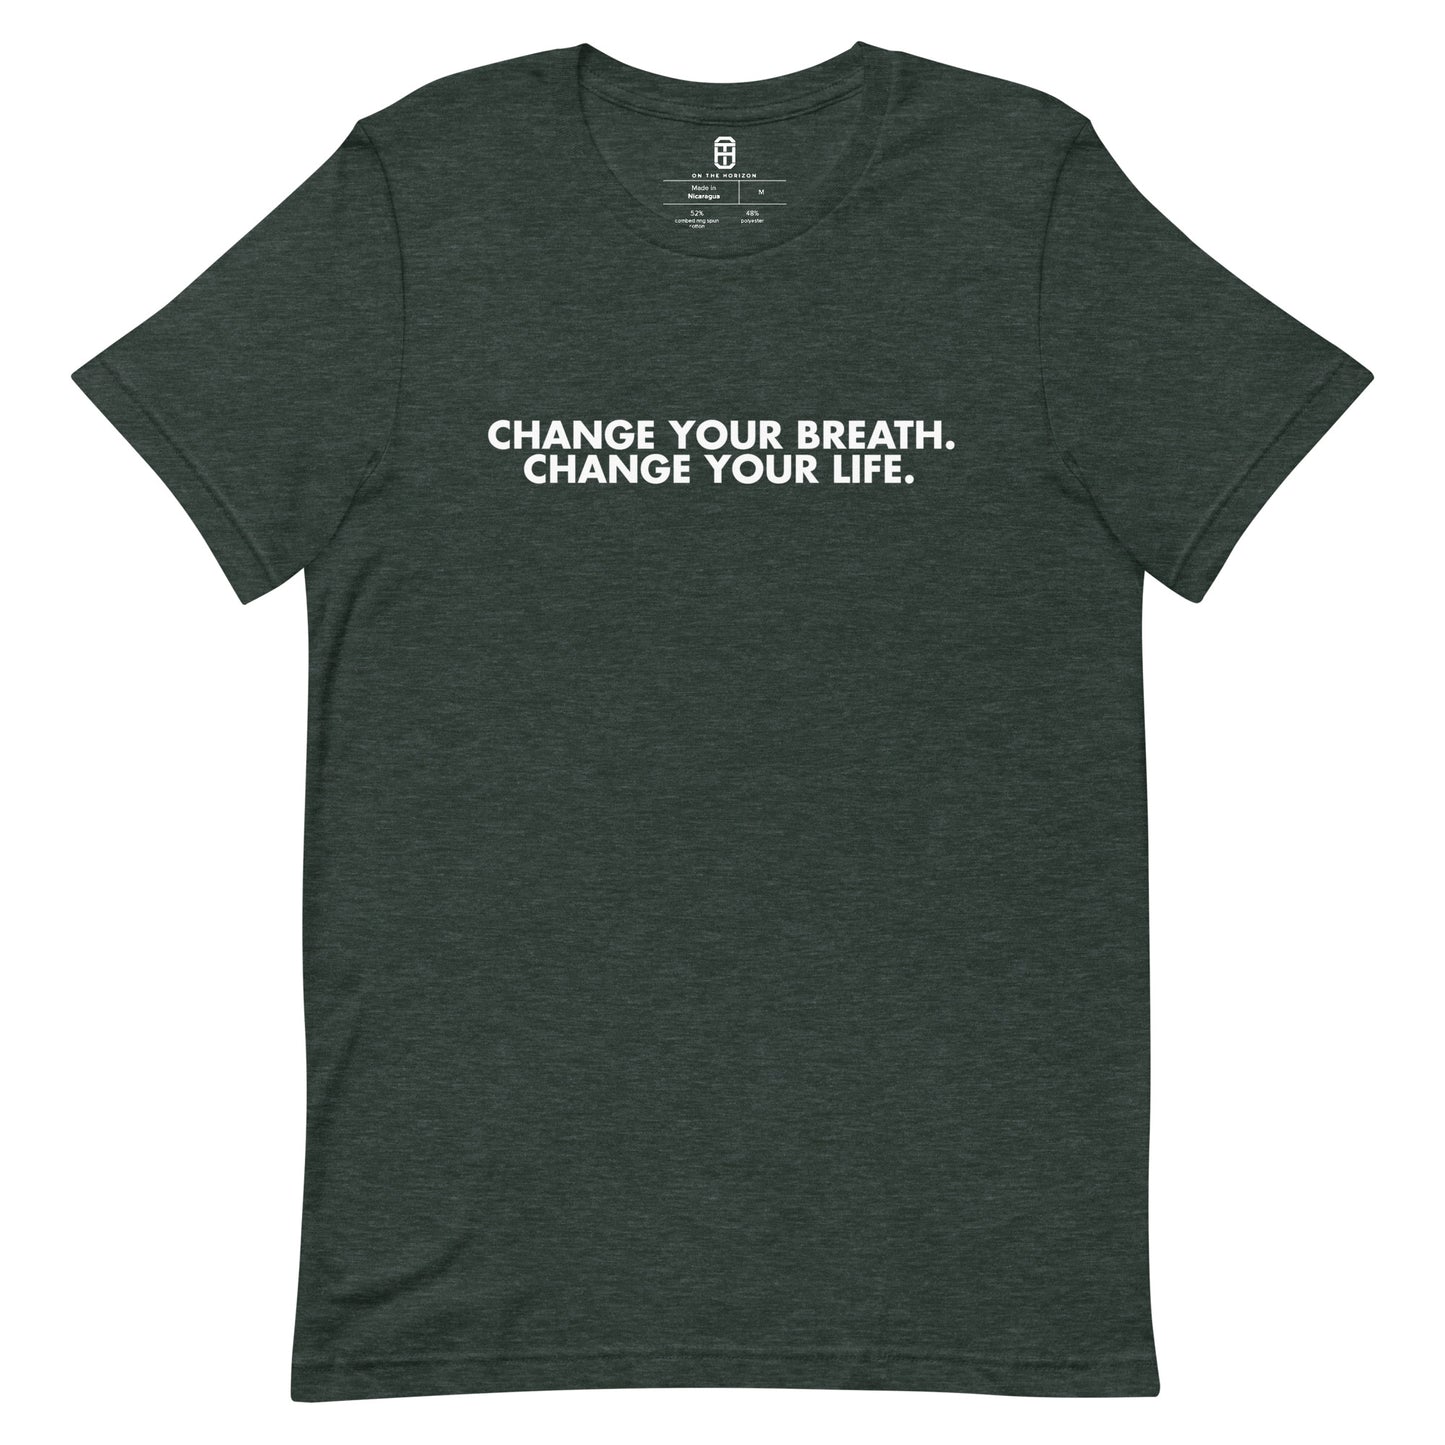 THE MINDSTRONG PROJECT CHANGE YOUR BREATH T-SHIRT (MORE COLORS)